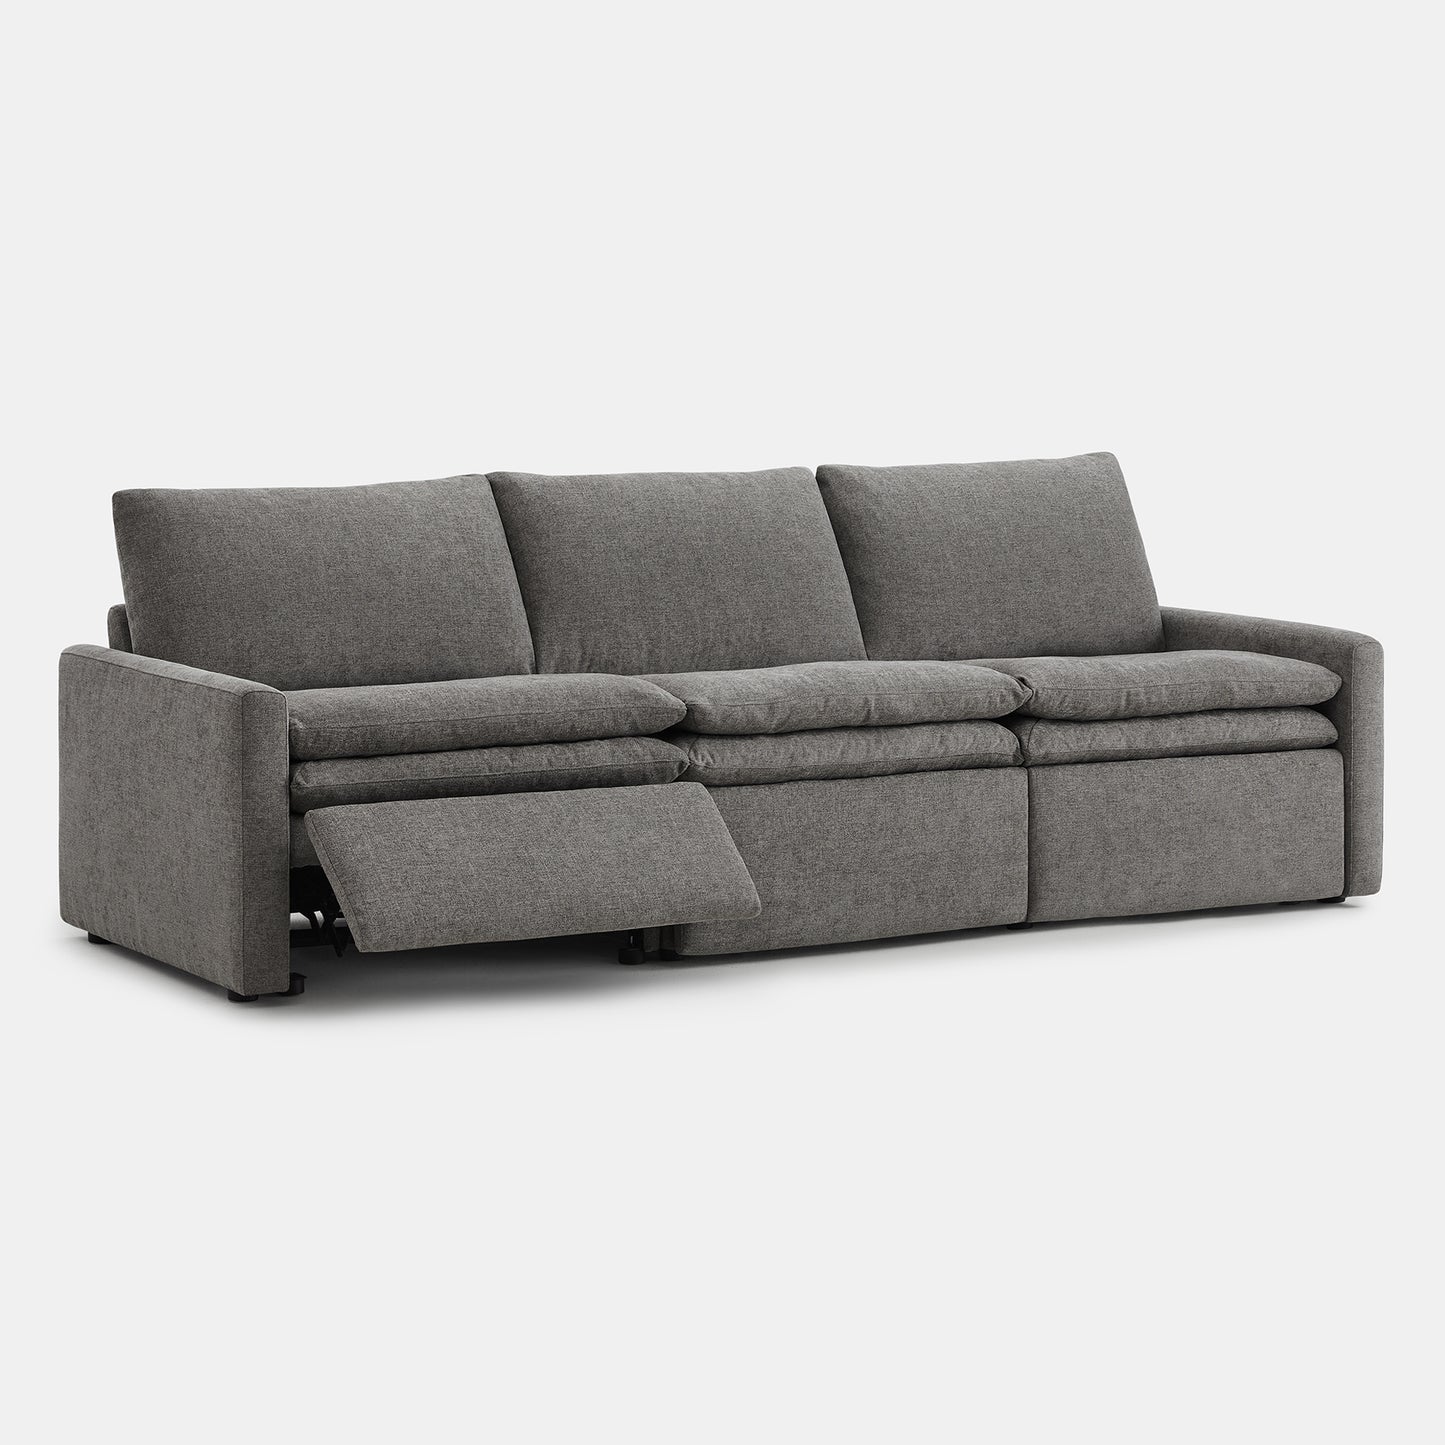 CHITA power recliner couch